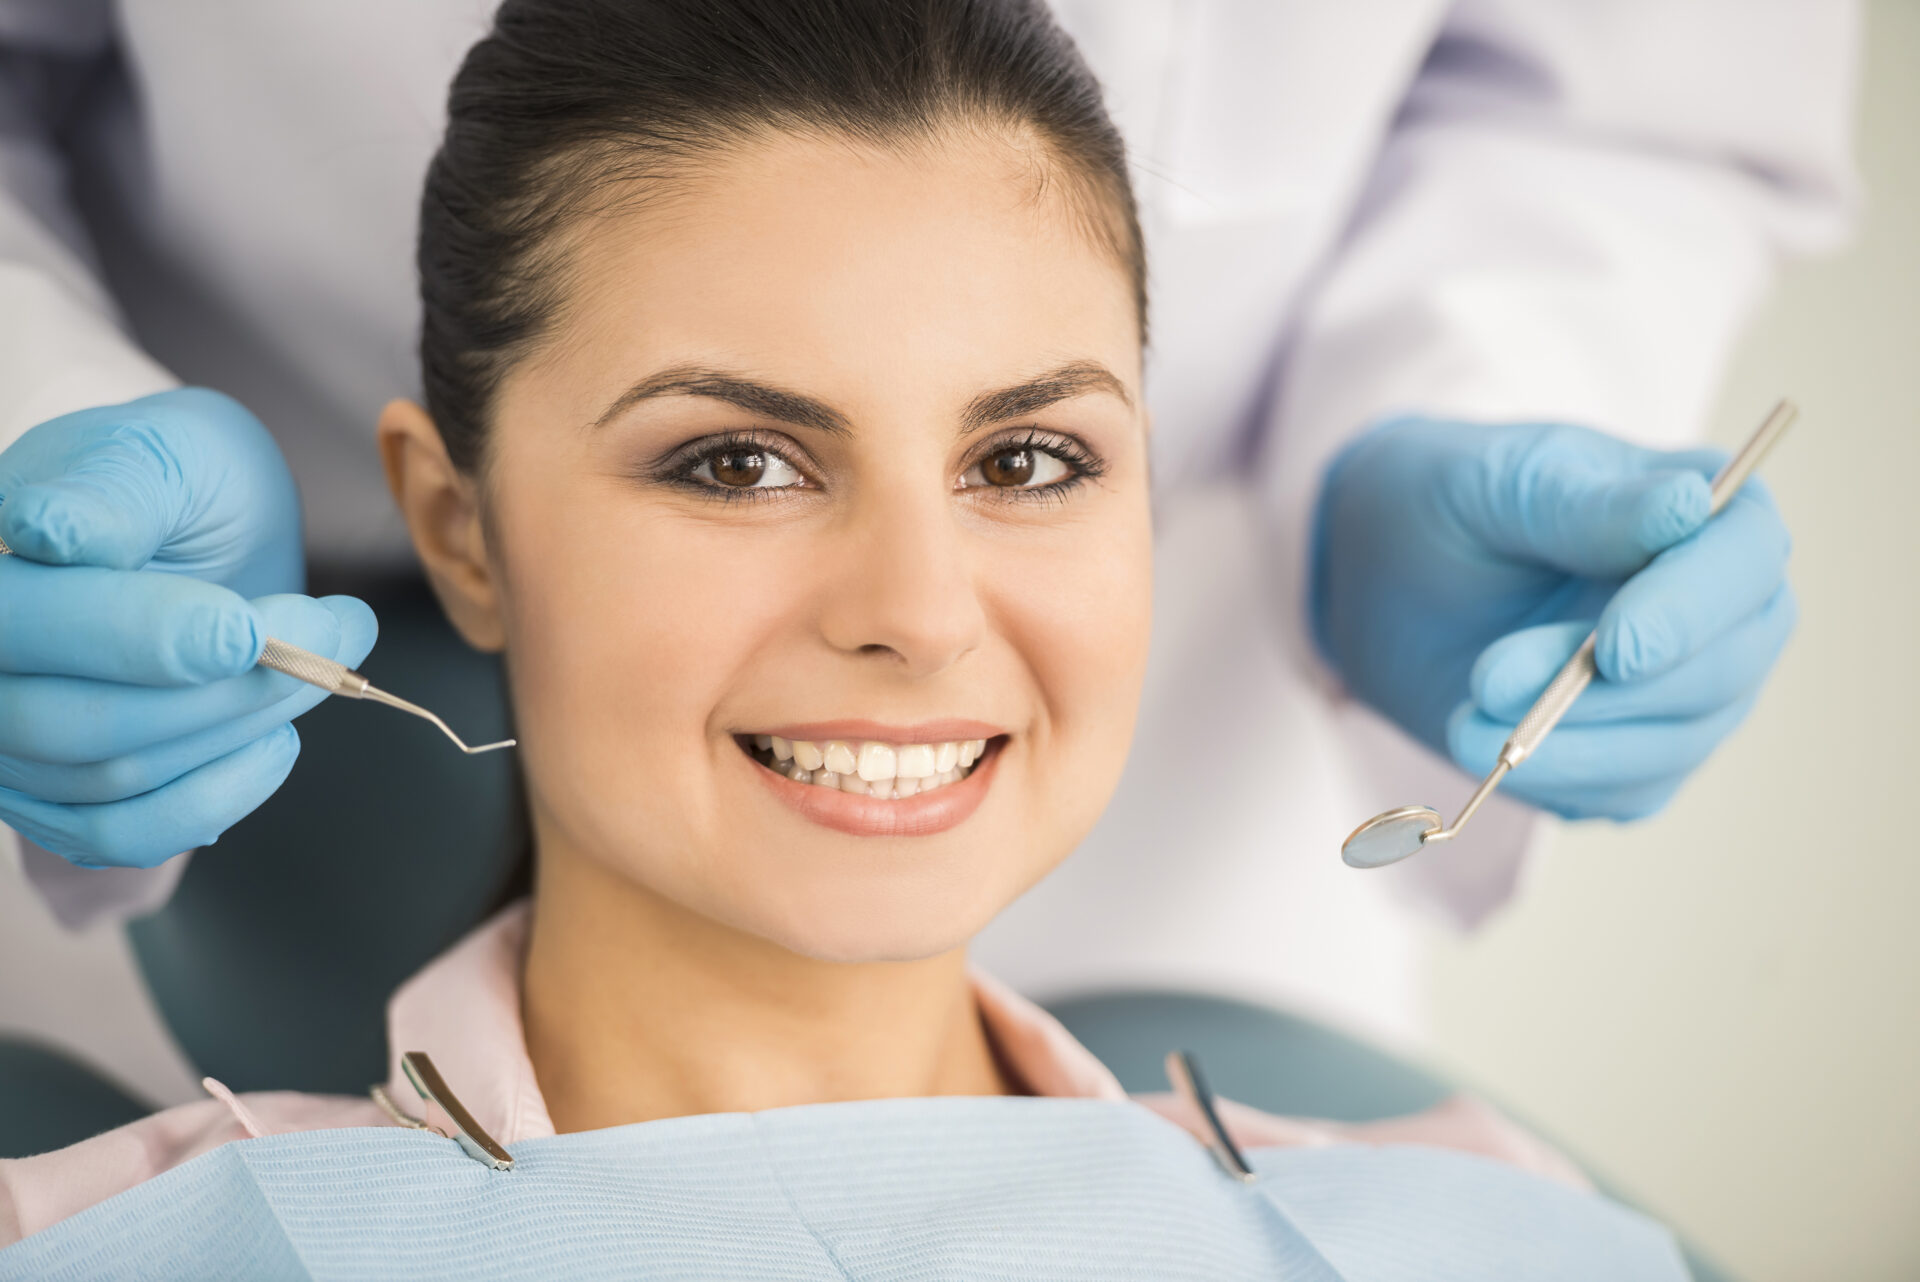 Professional Teeth Cleaning in Uptown, Chicago, IL